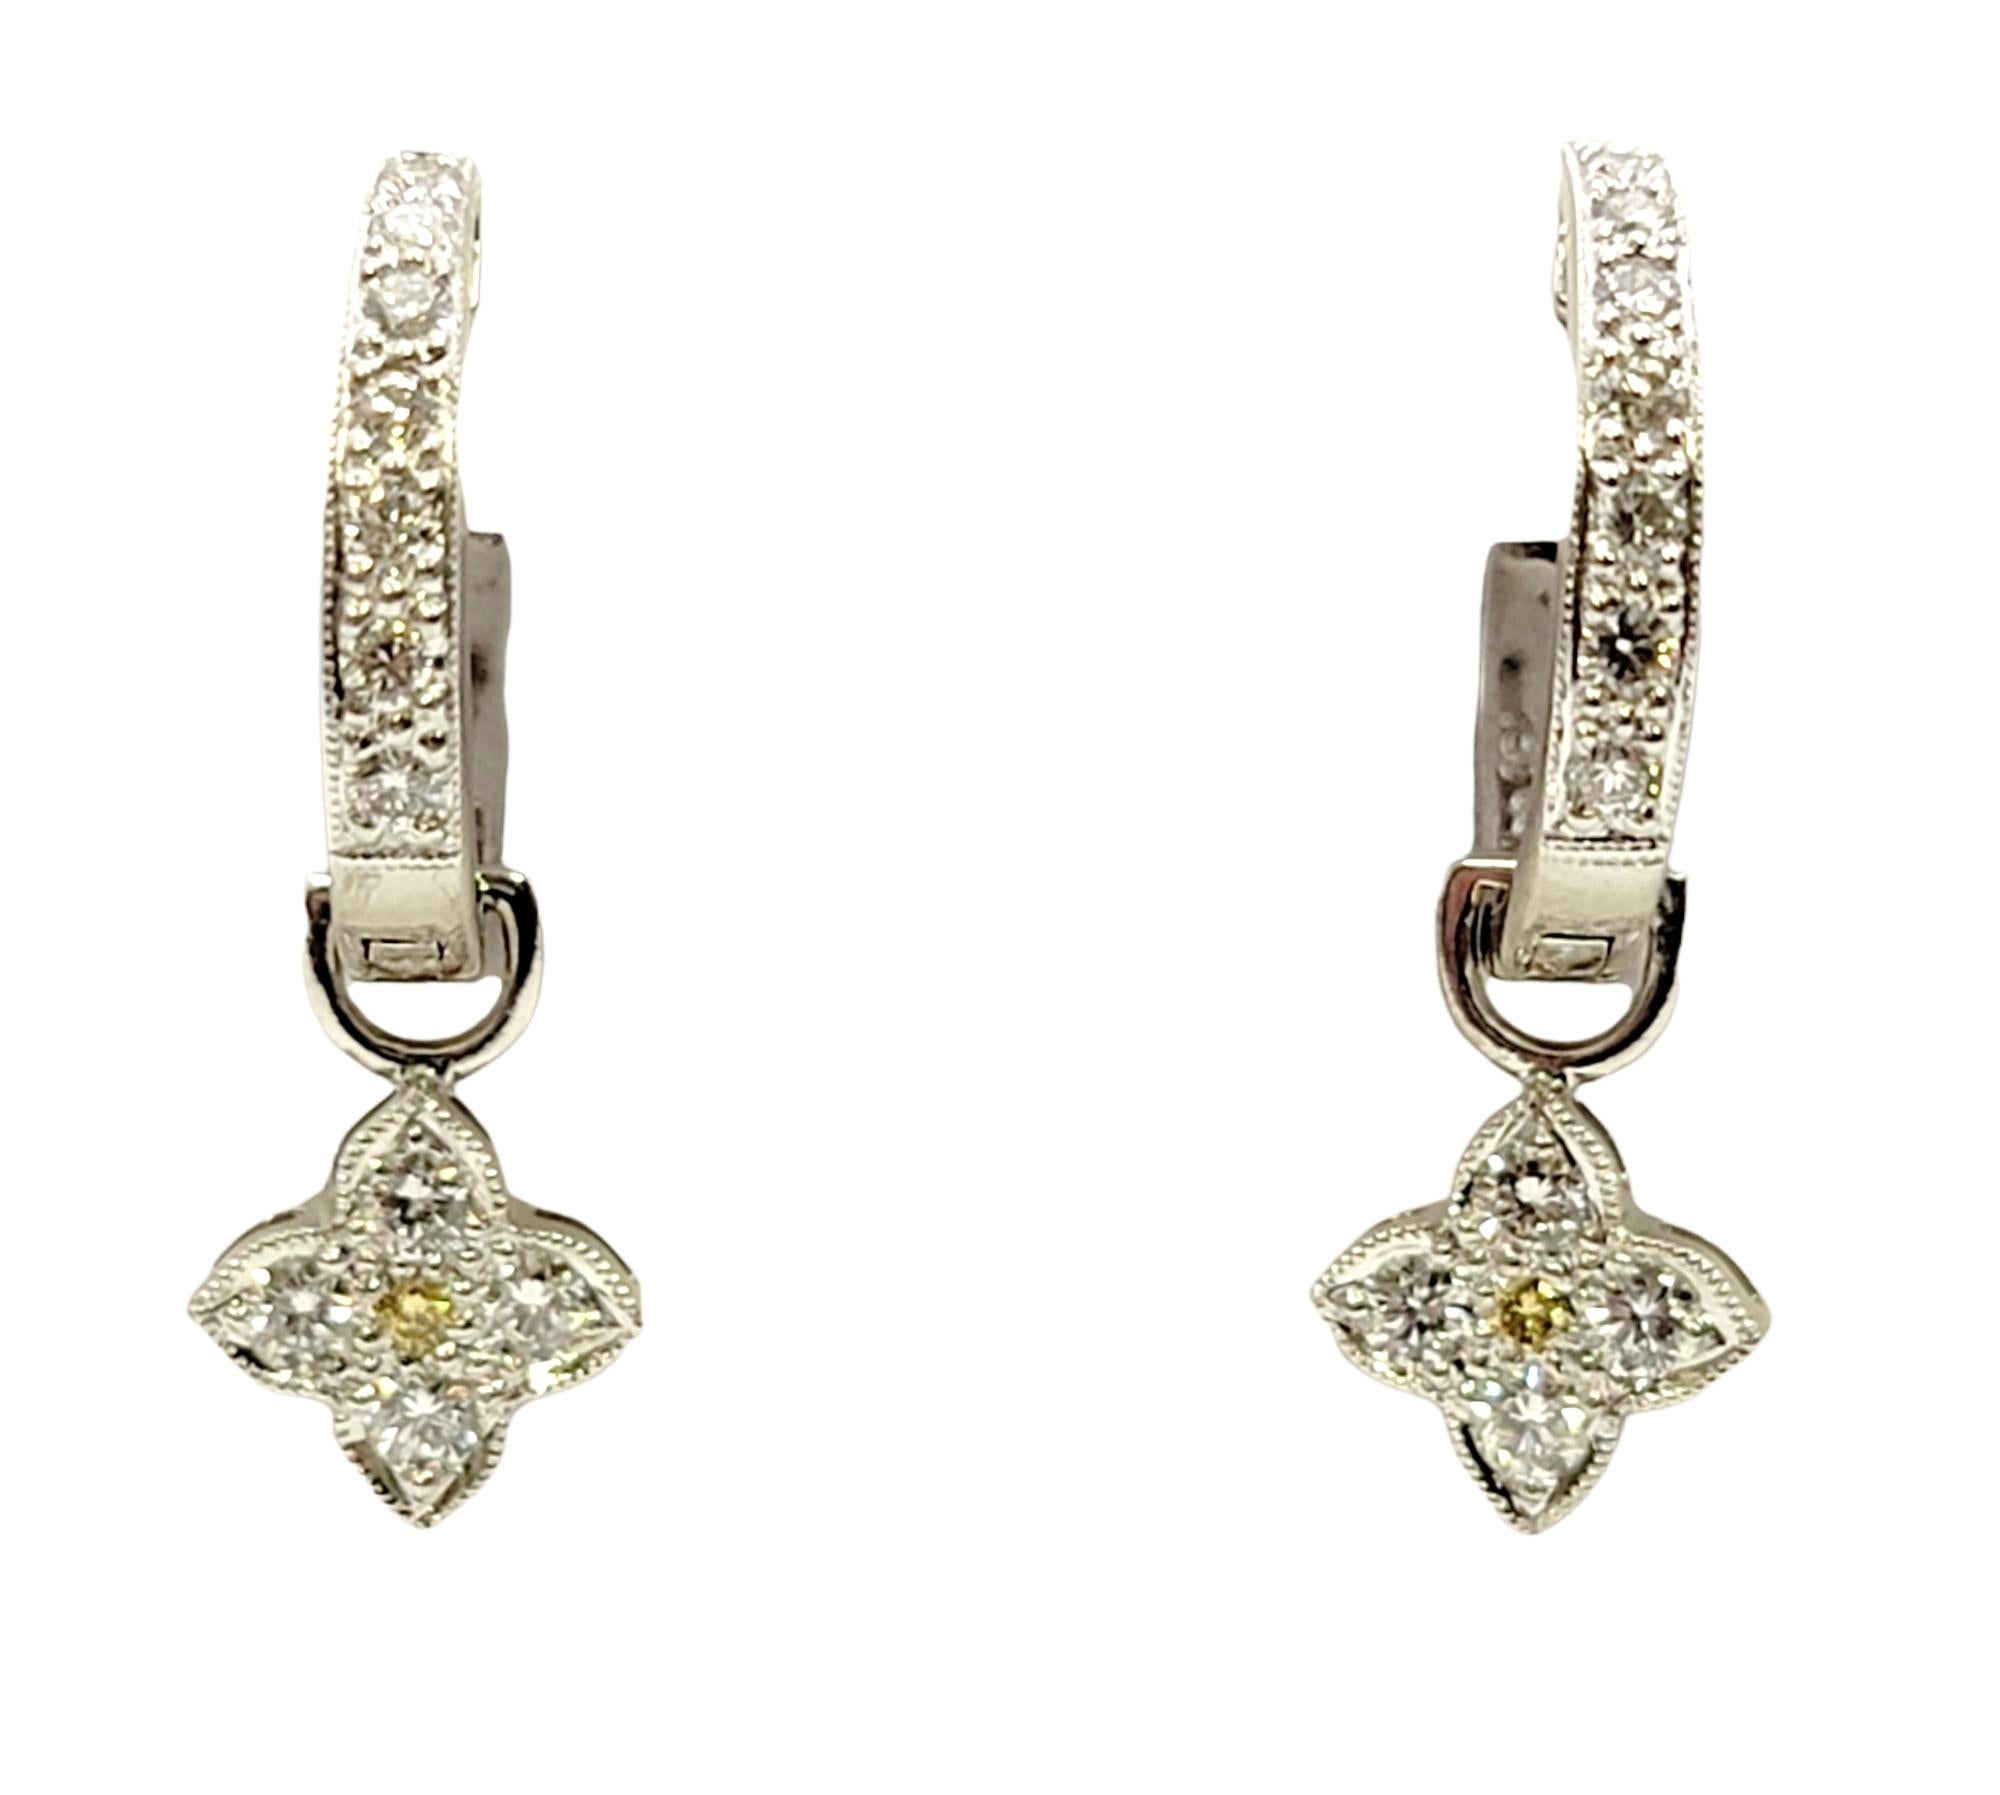 You will love these dainty diamond hoop earrings! Set in polished white gold, the tiny huggie hoops are embellished on the front half with glittering natural diamonds, while a yellow and white diamond drop dangles playfully off the bottom. The